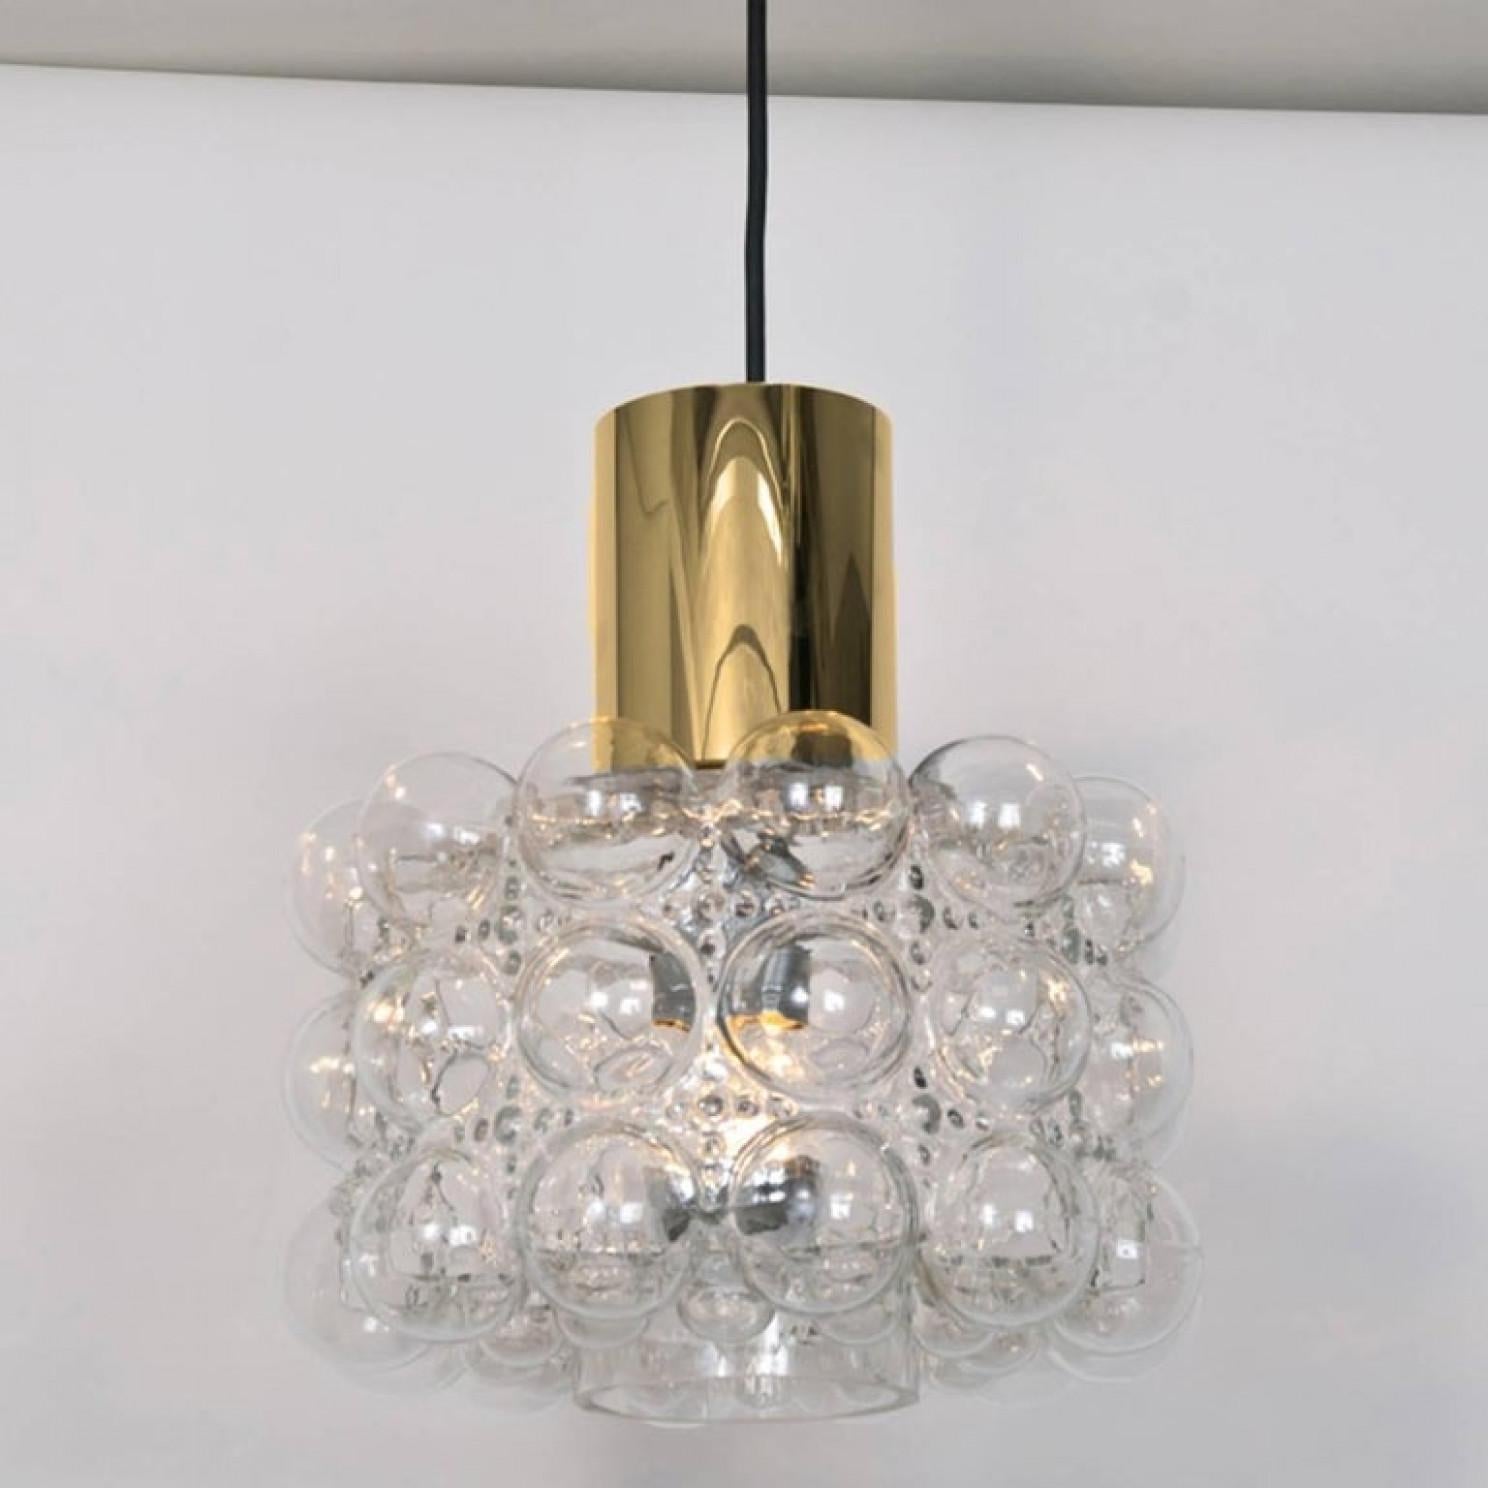 German Pair of Beautiful Bubble Glass Pendant Lamps by Helena Tynell, 1960 For Sale